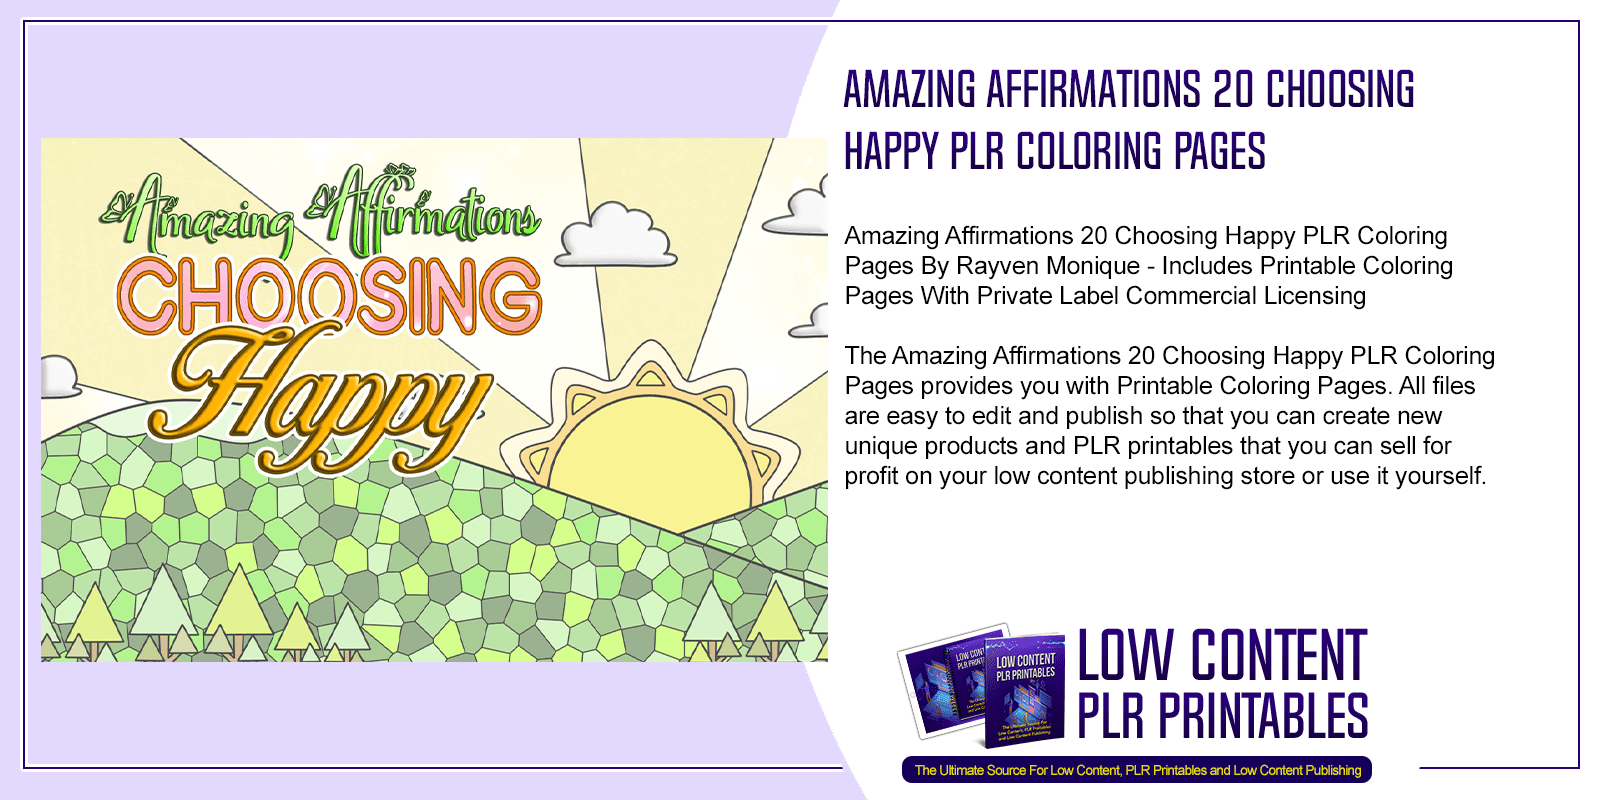 Amazing Affirmations 20 Choosing Happy PLR Coloring Pages